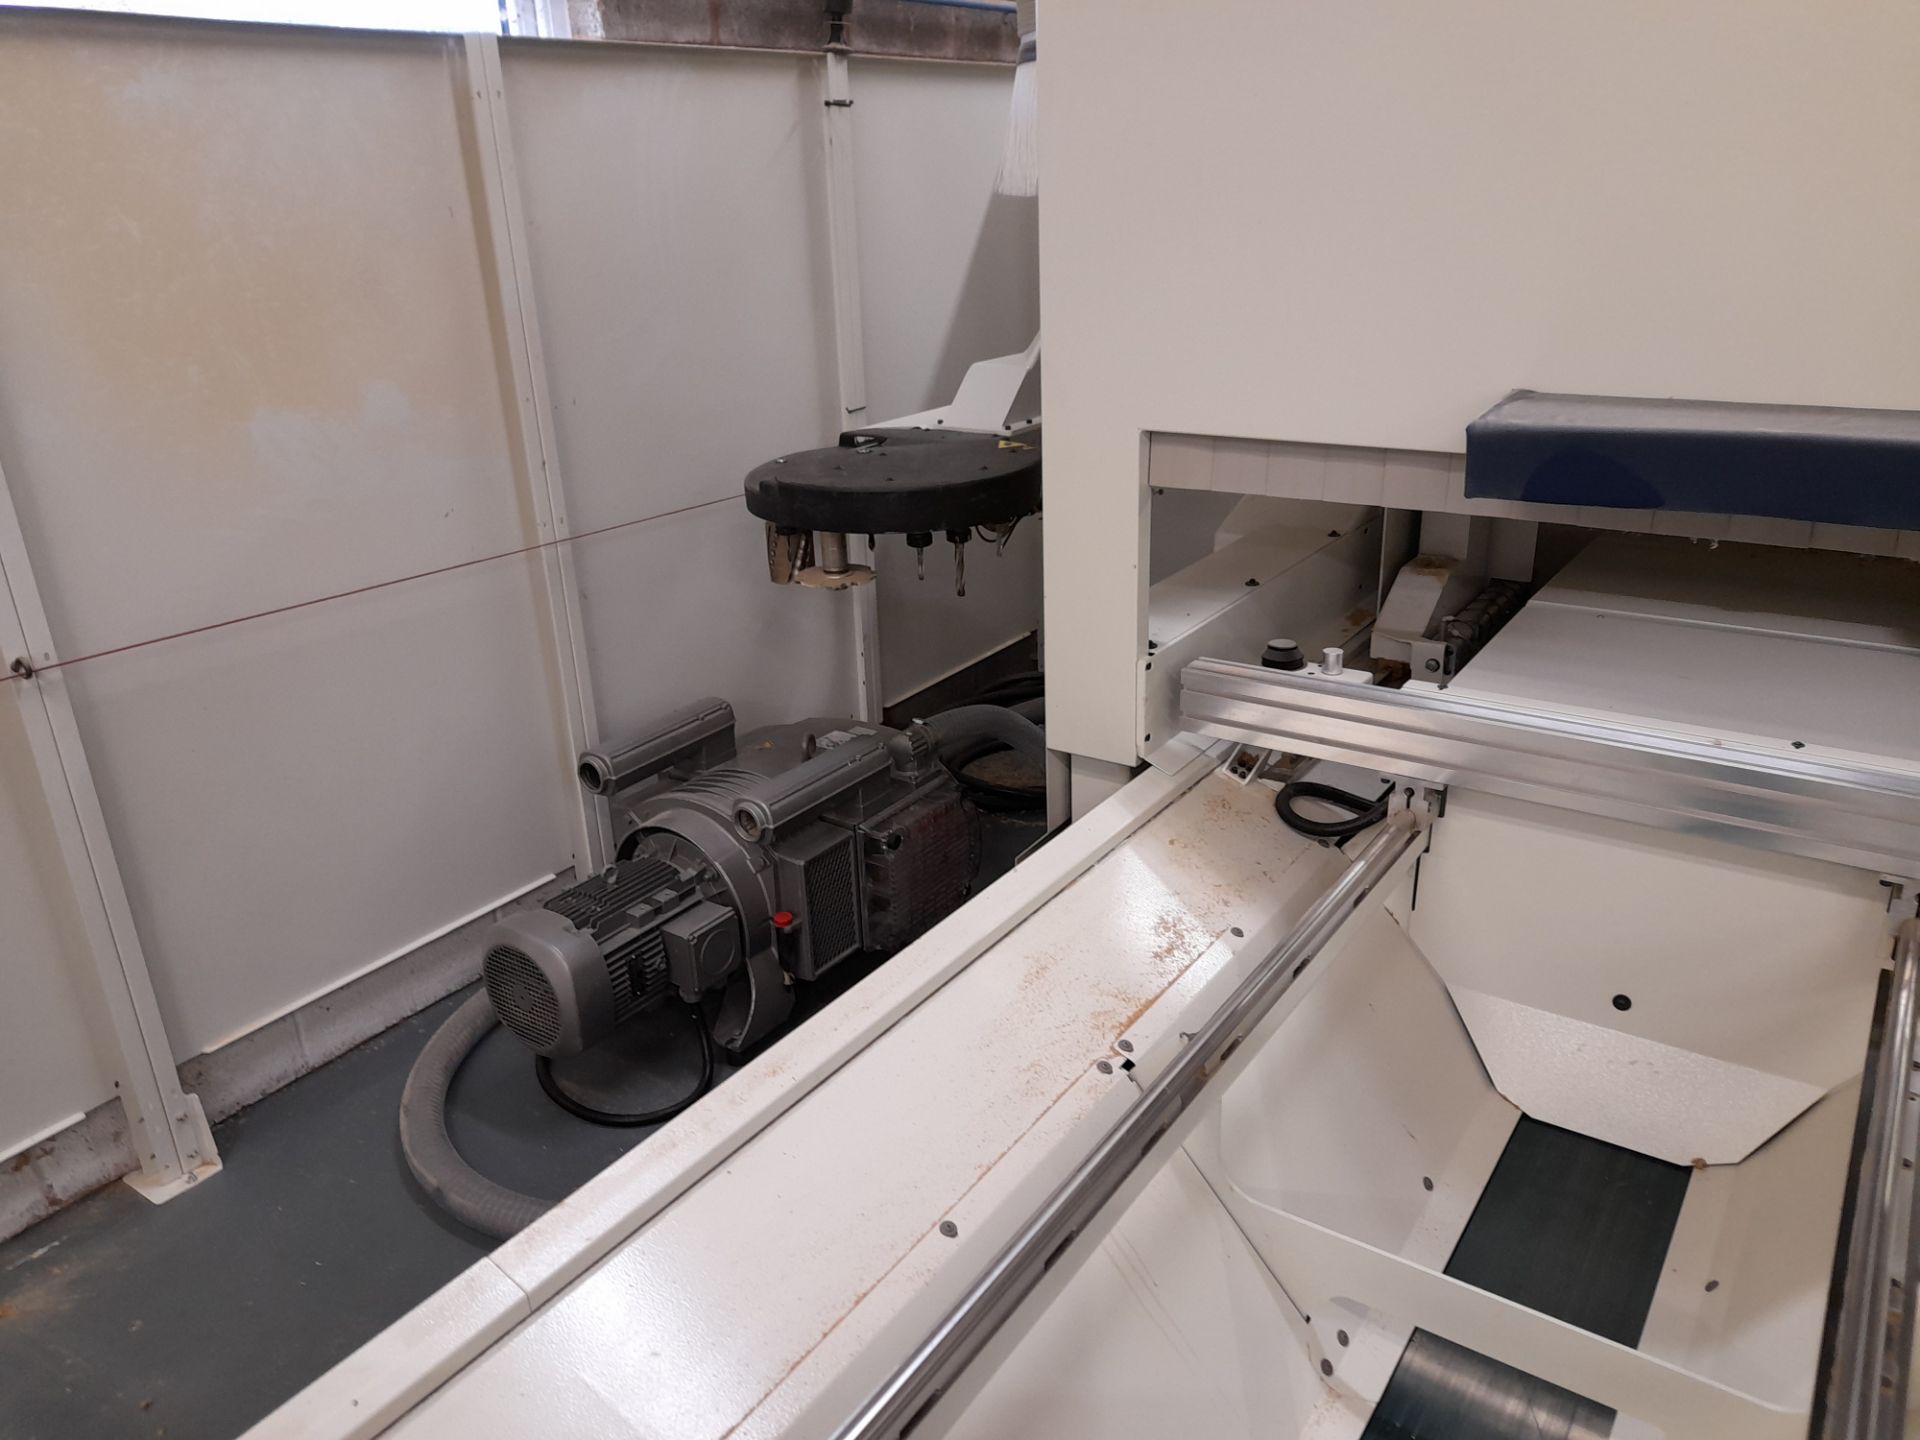 SCM Accord 25fx CNC Machining Centre, fully automated borer & router, Serial Number AA2/004141, - Image 11 of 43